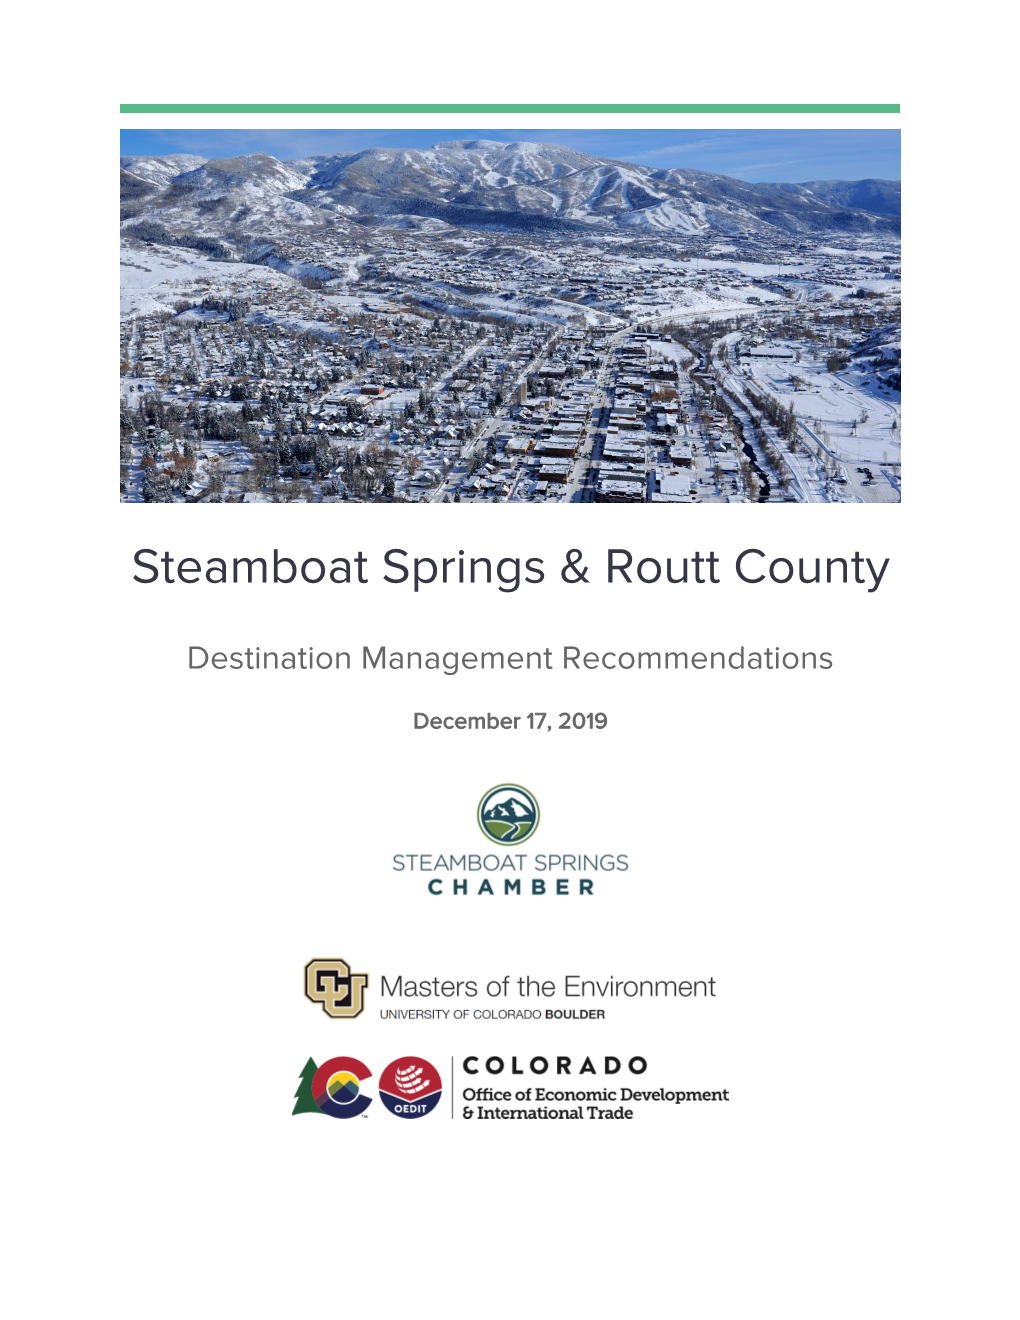 Steamboat Springs & Routt County